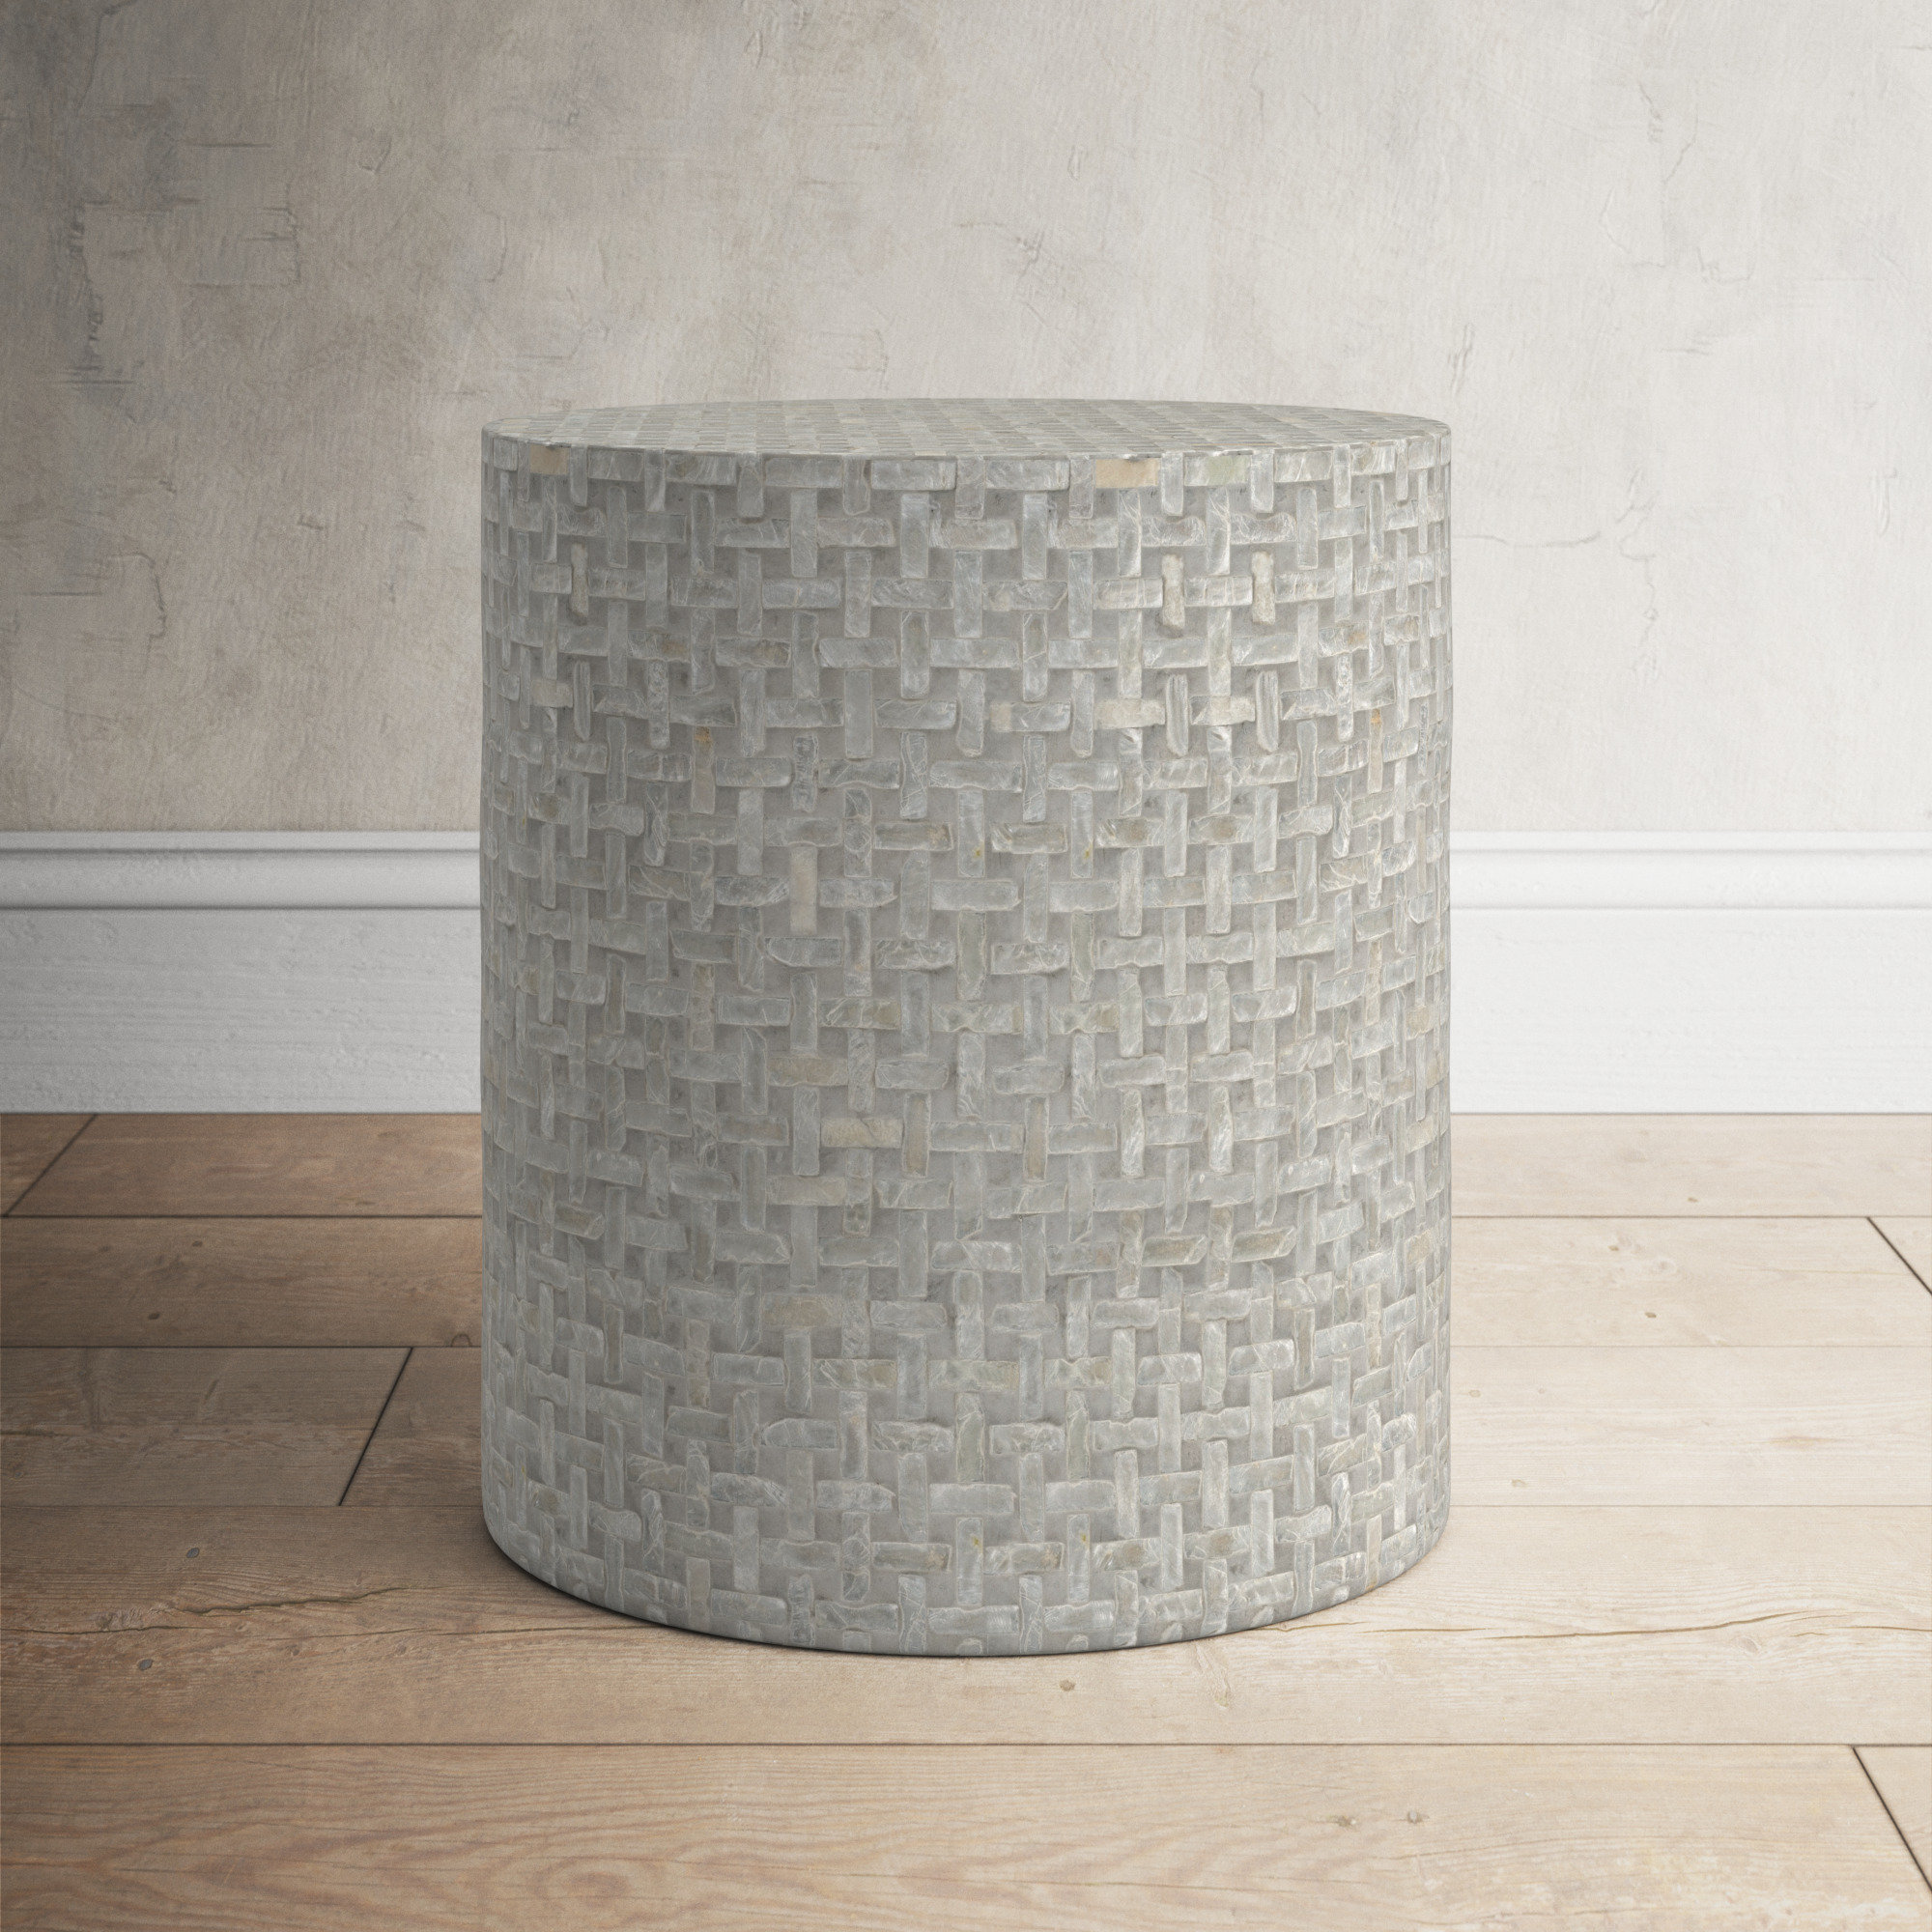 Eve Drum Side Table – Birch, Home Furniture